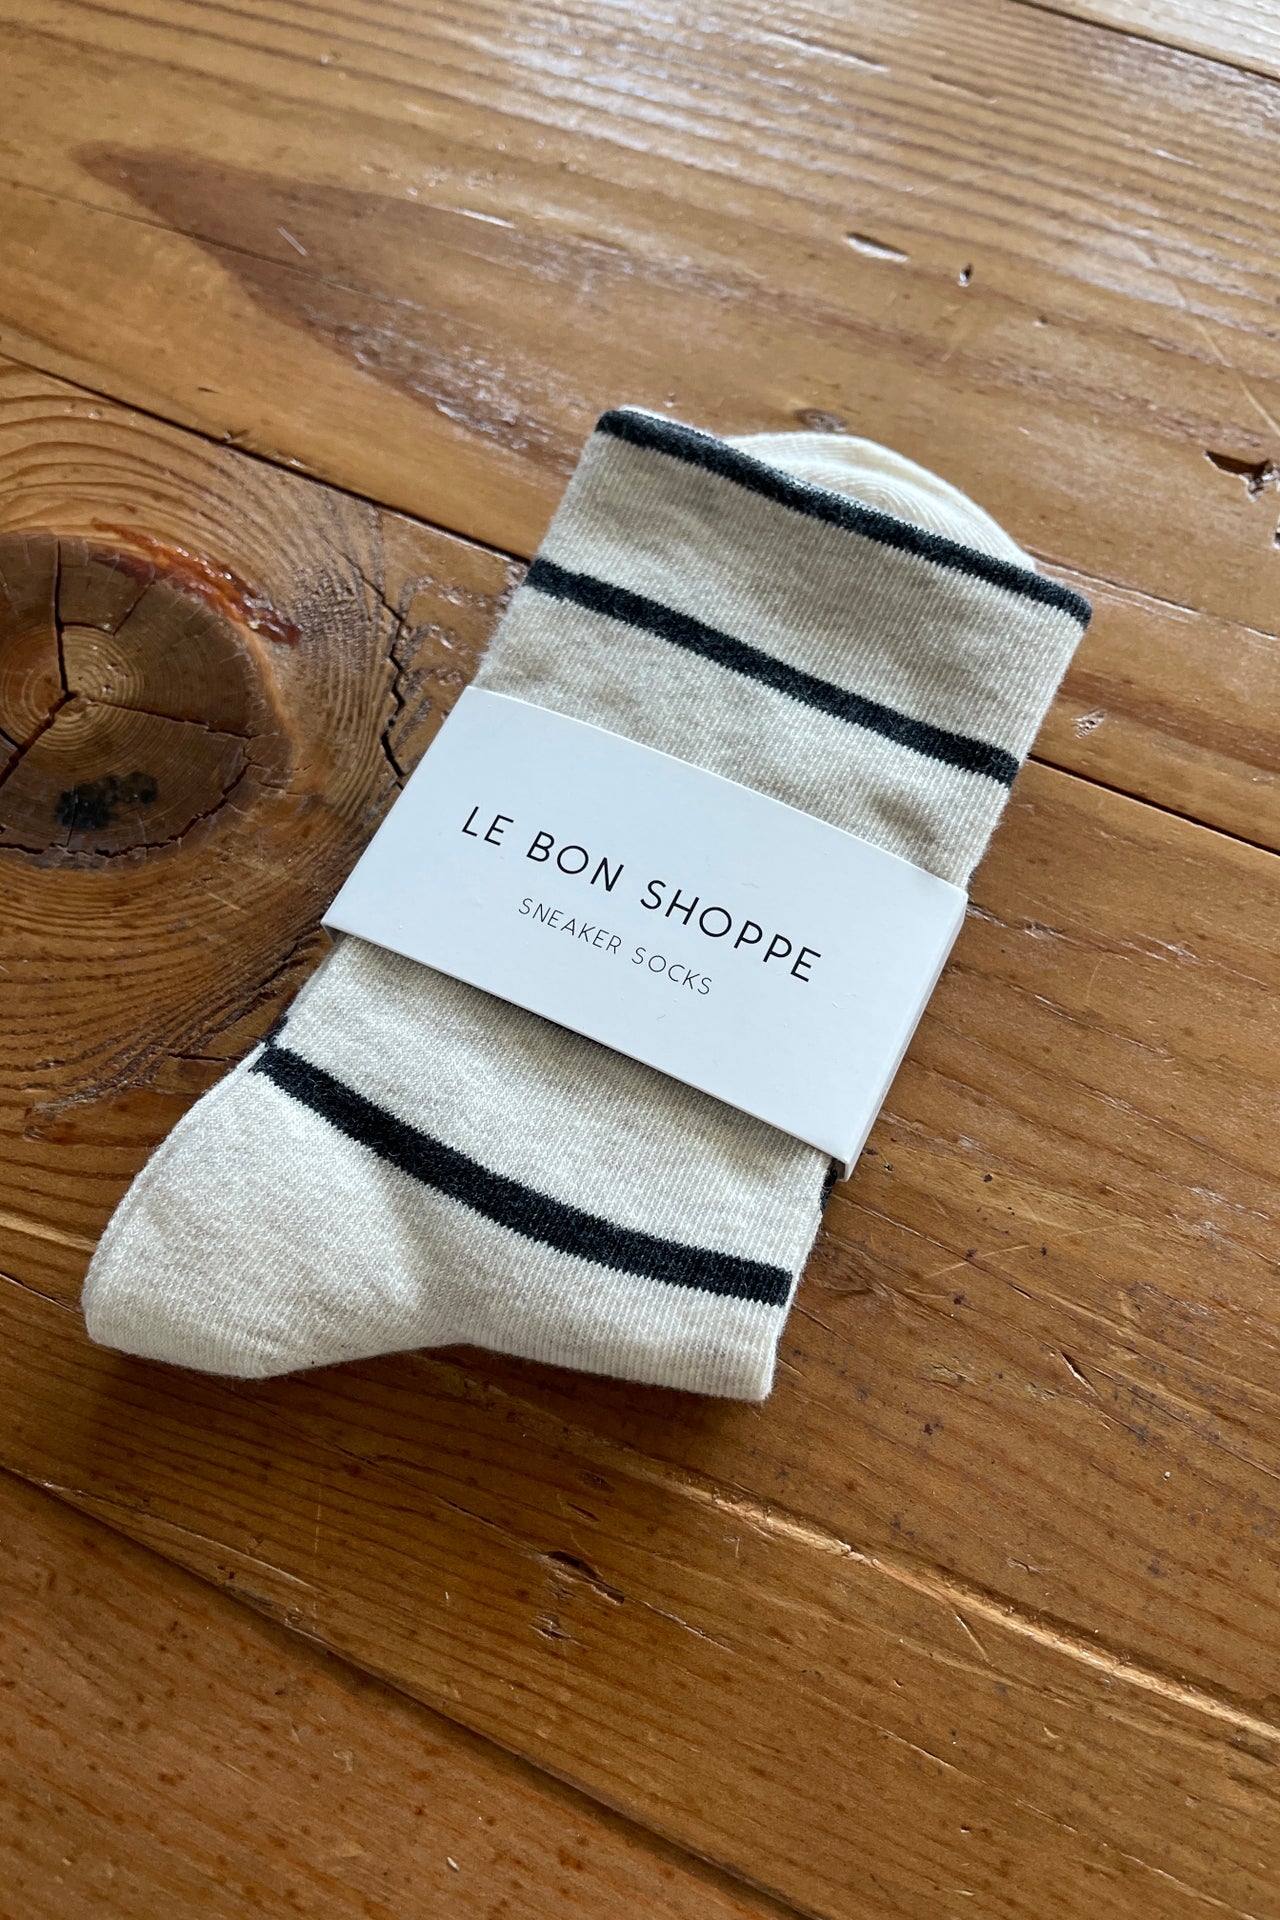 Le Bon Shoppe Wally Socks are made from a breathable cotton blend.